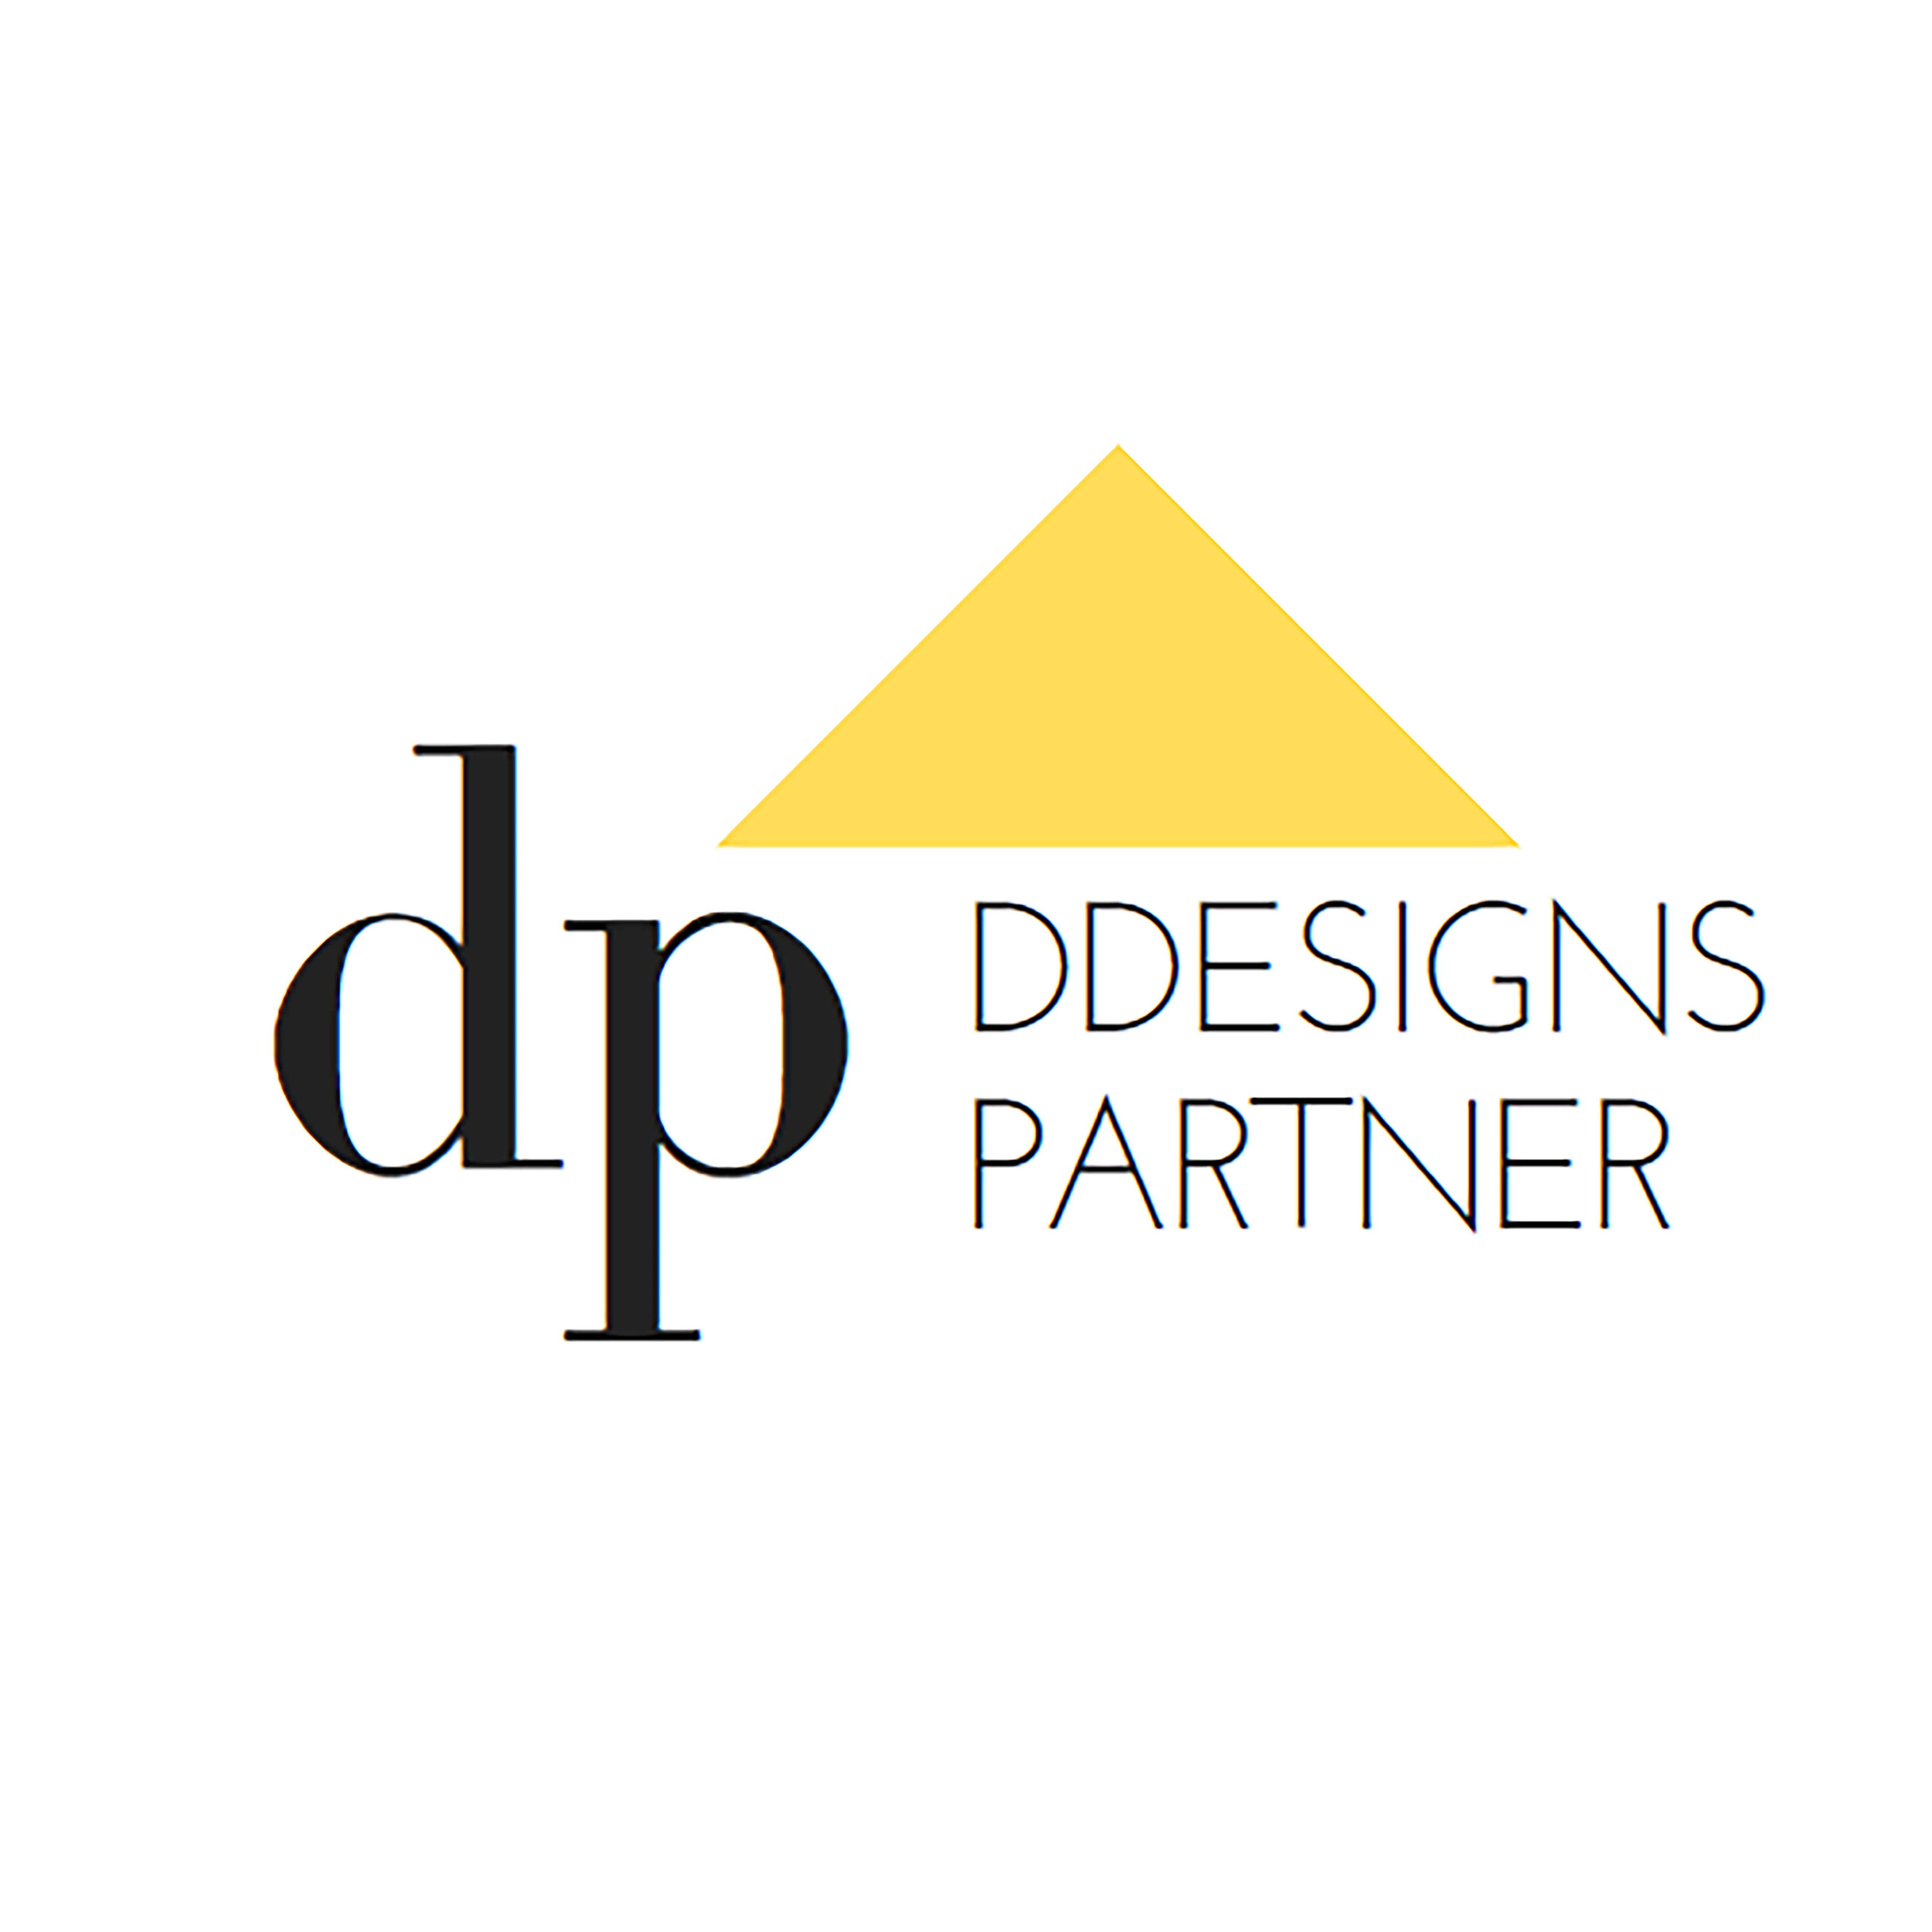 DDESIGNS PARTNER|Legal Services|Professional Services